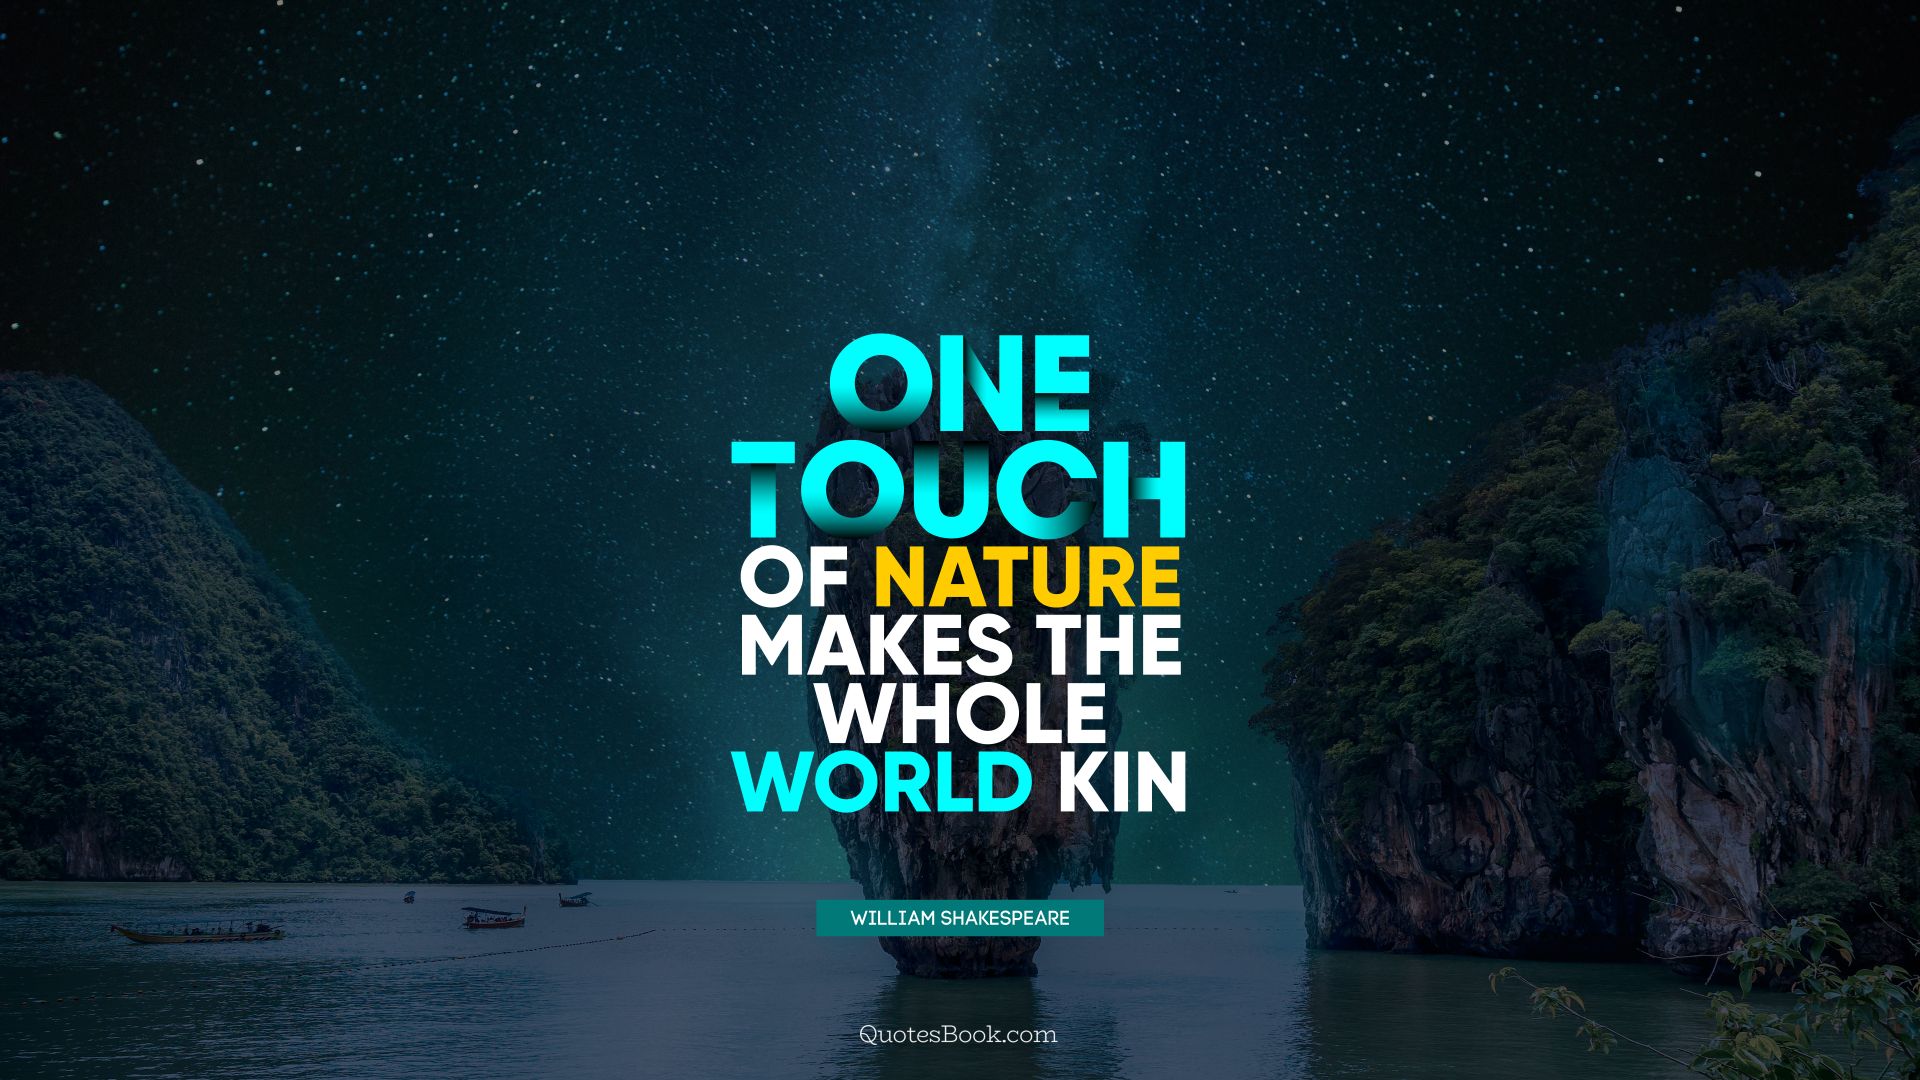 One touch of nature makes the whole world kin. - Quote by William Shakespeare